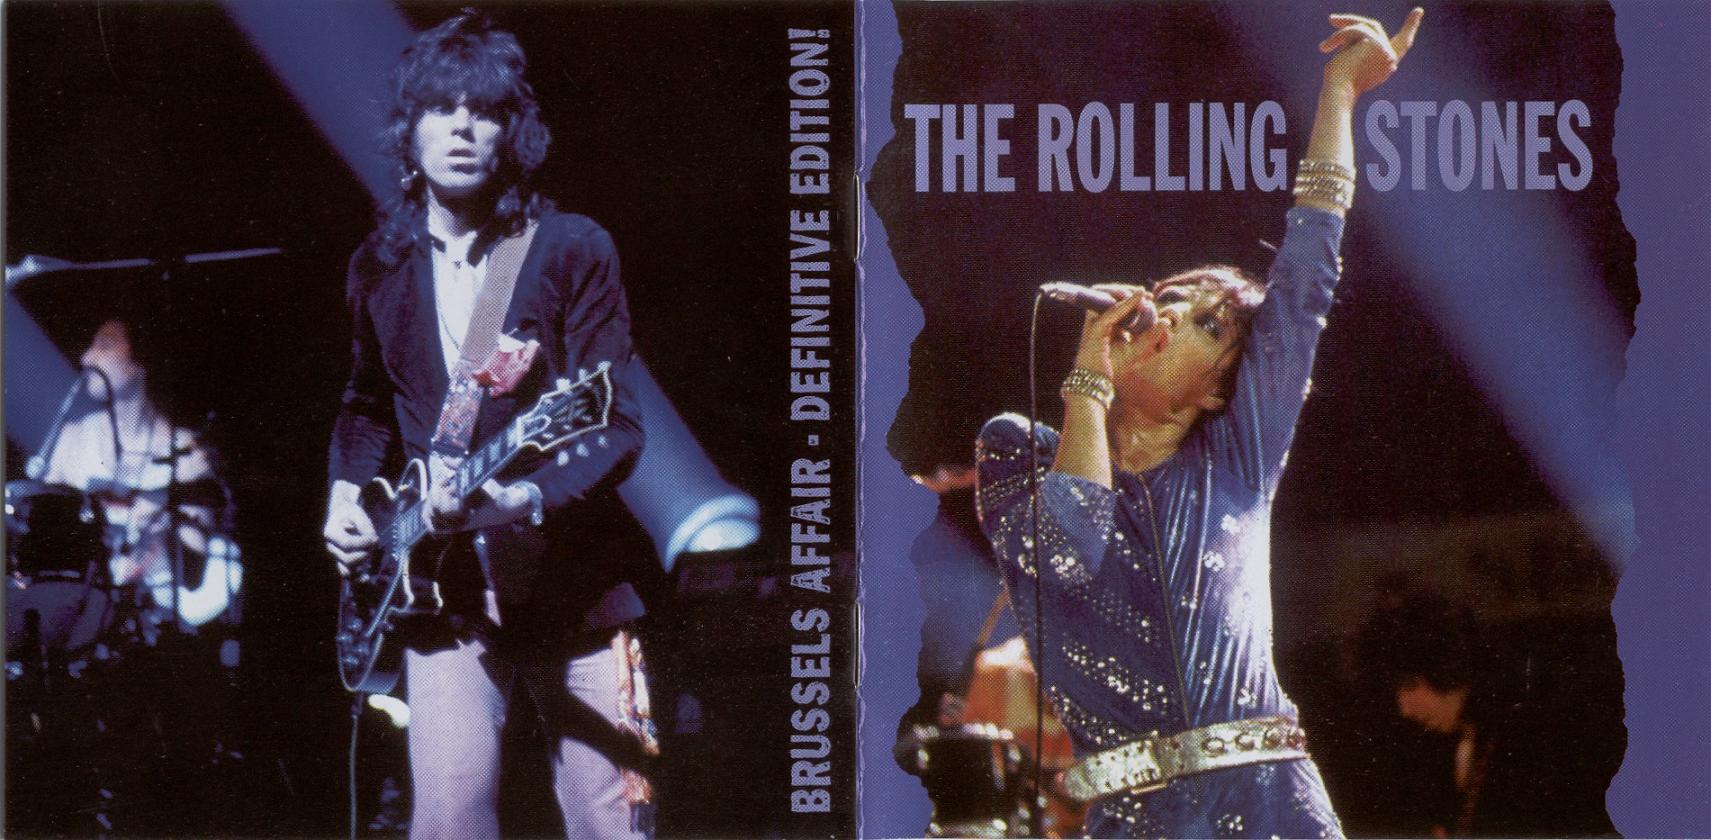 The rolling stones brussels affair torrent torrentismo tamesis colombia